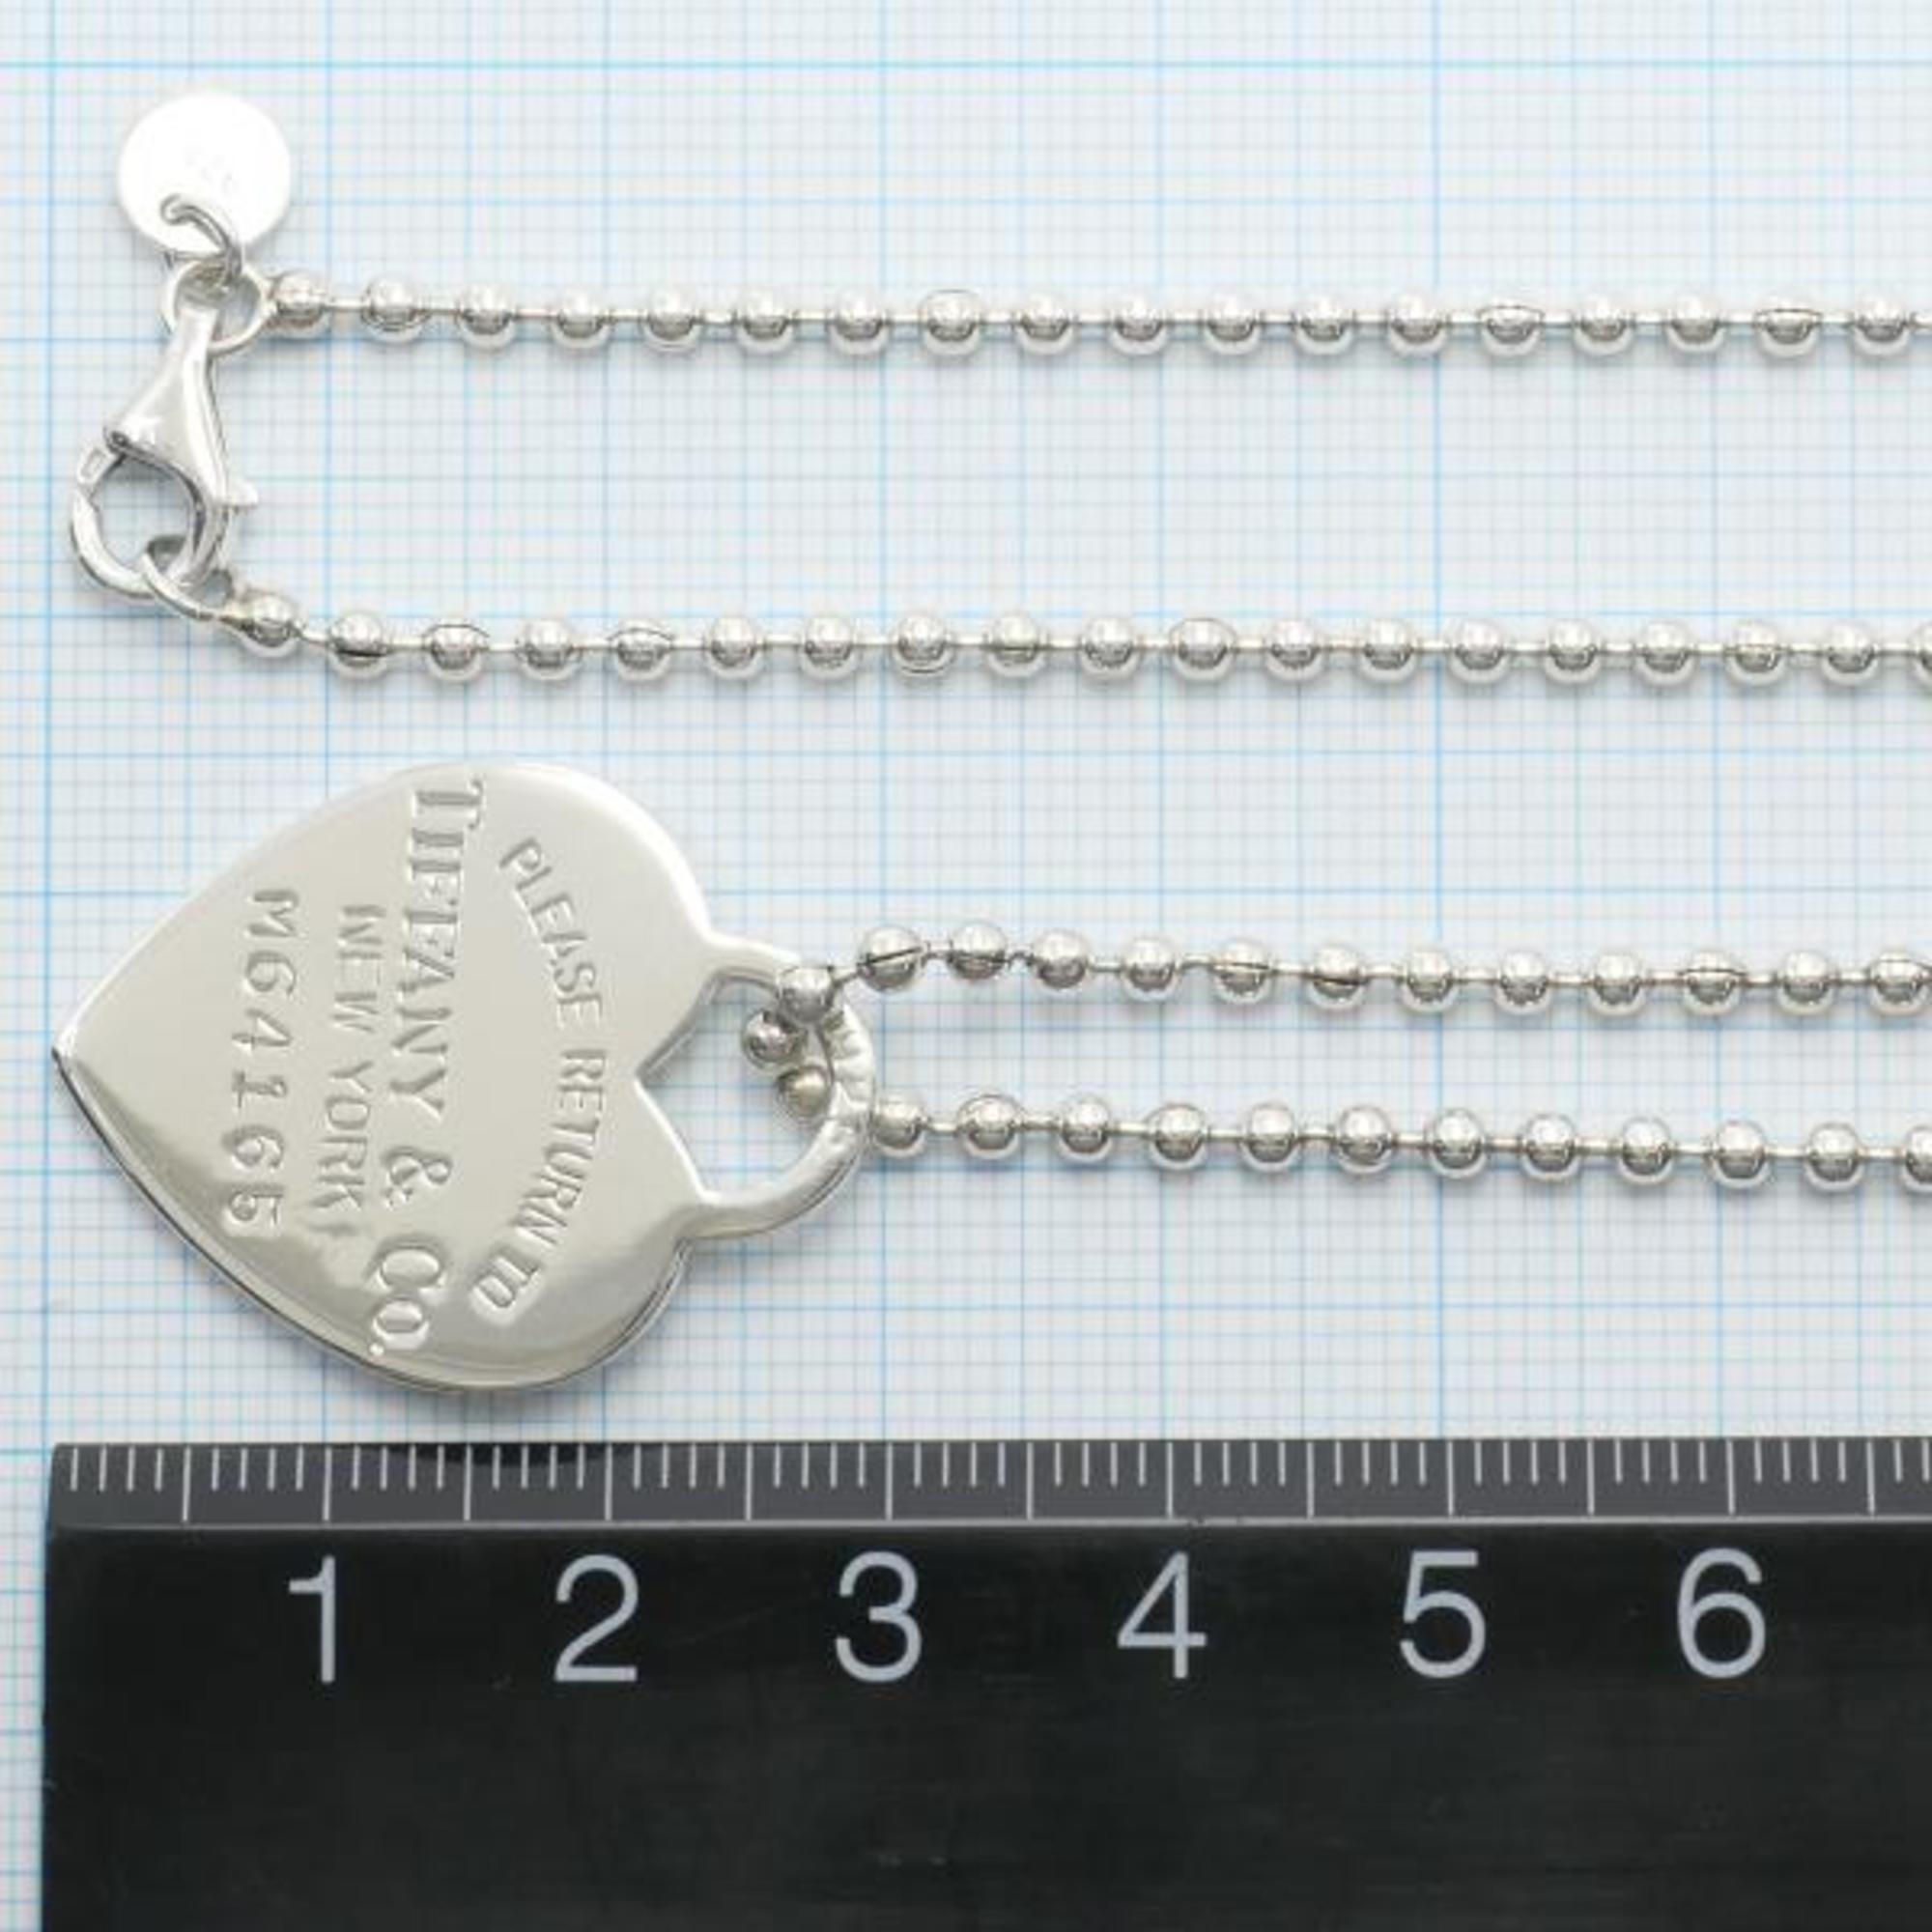 Tiffany Return to Silver Necklace Total weight approx. 22.4g 88cm